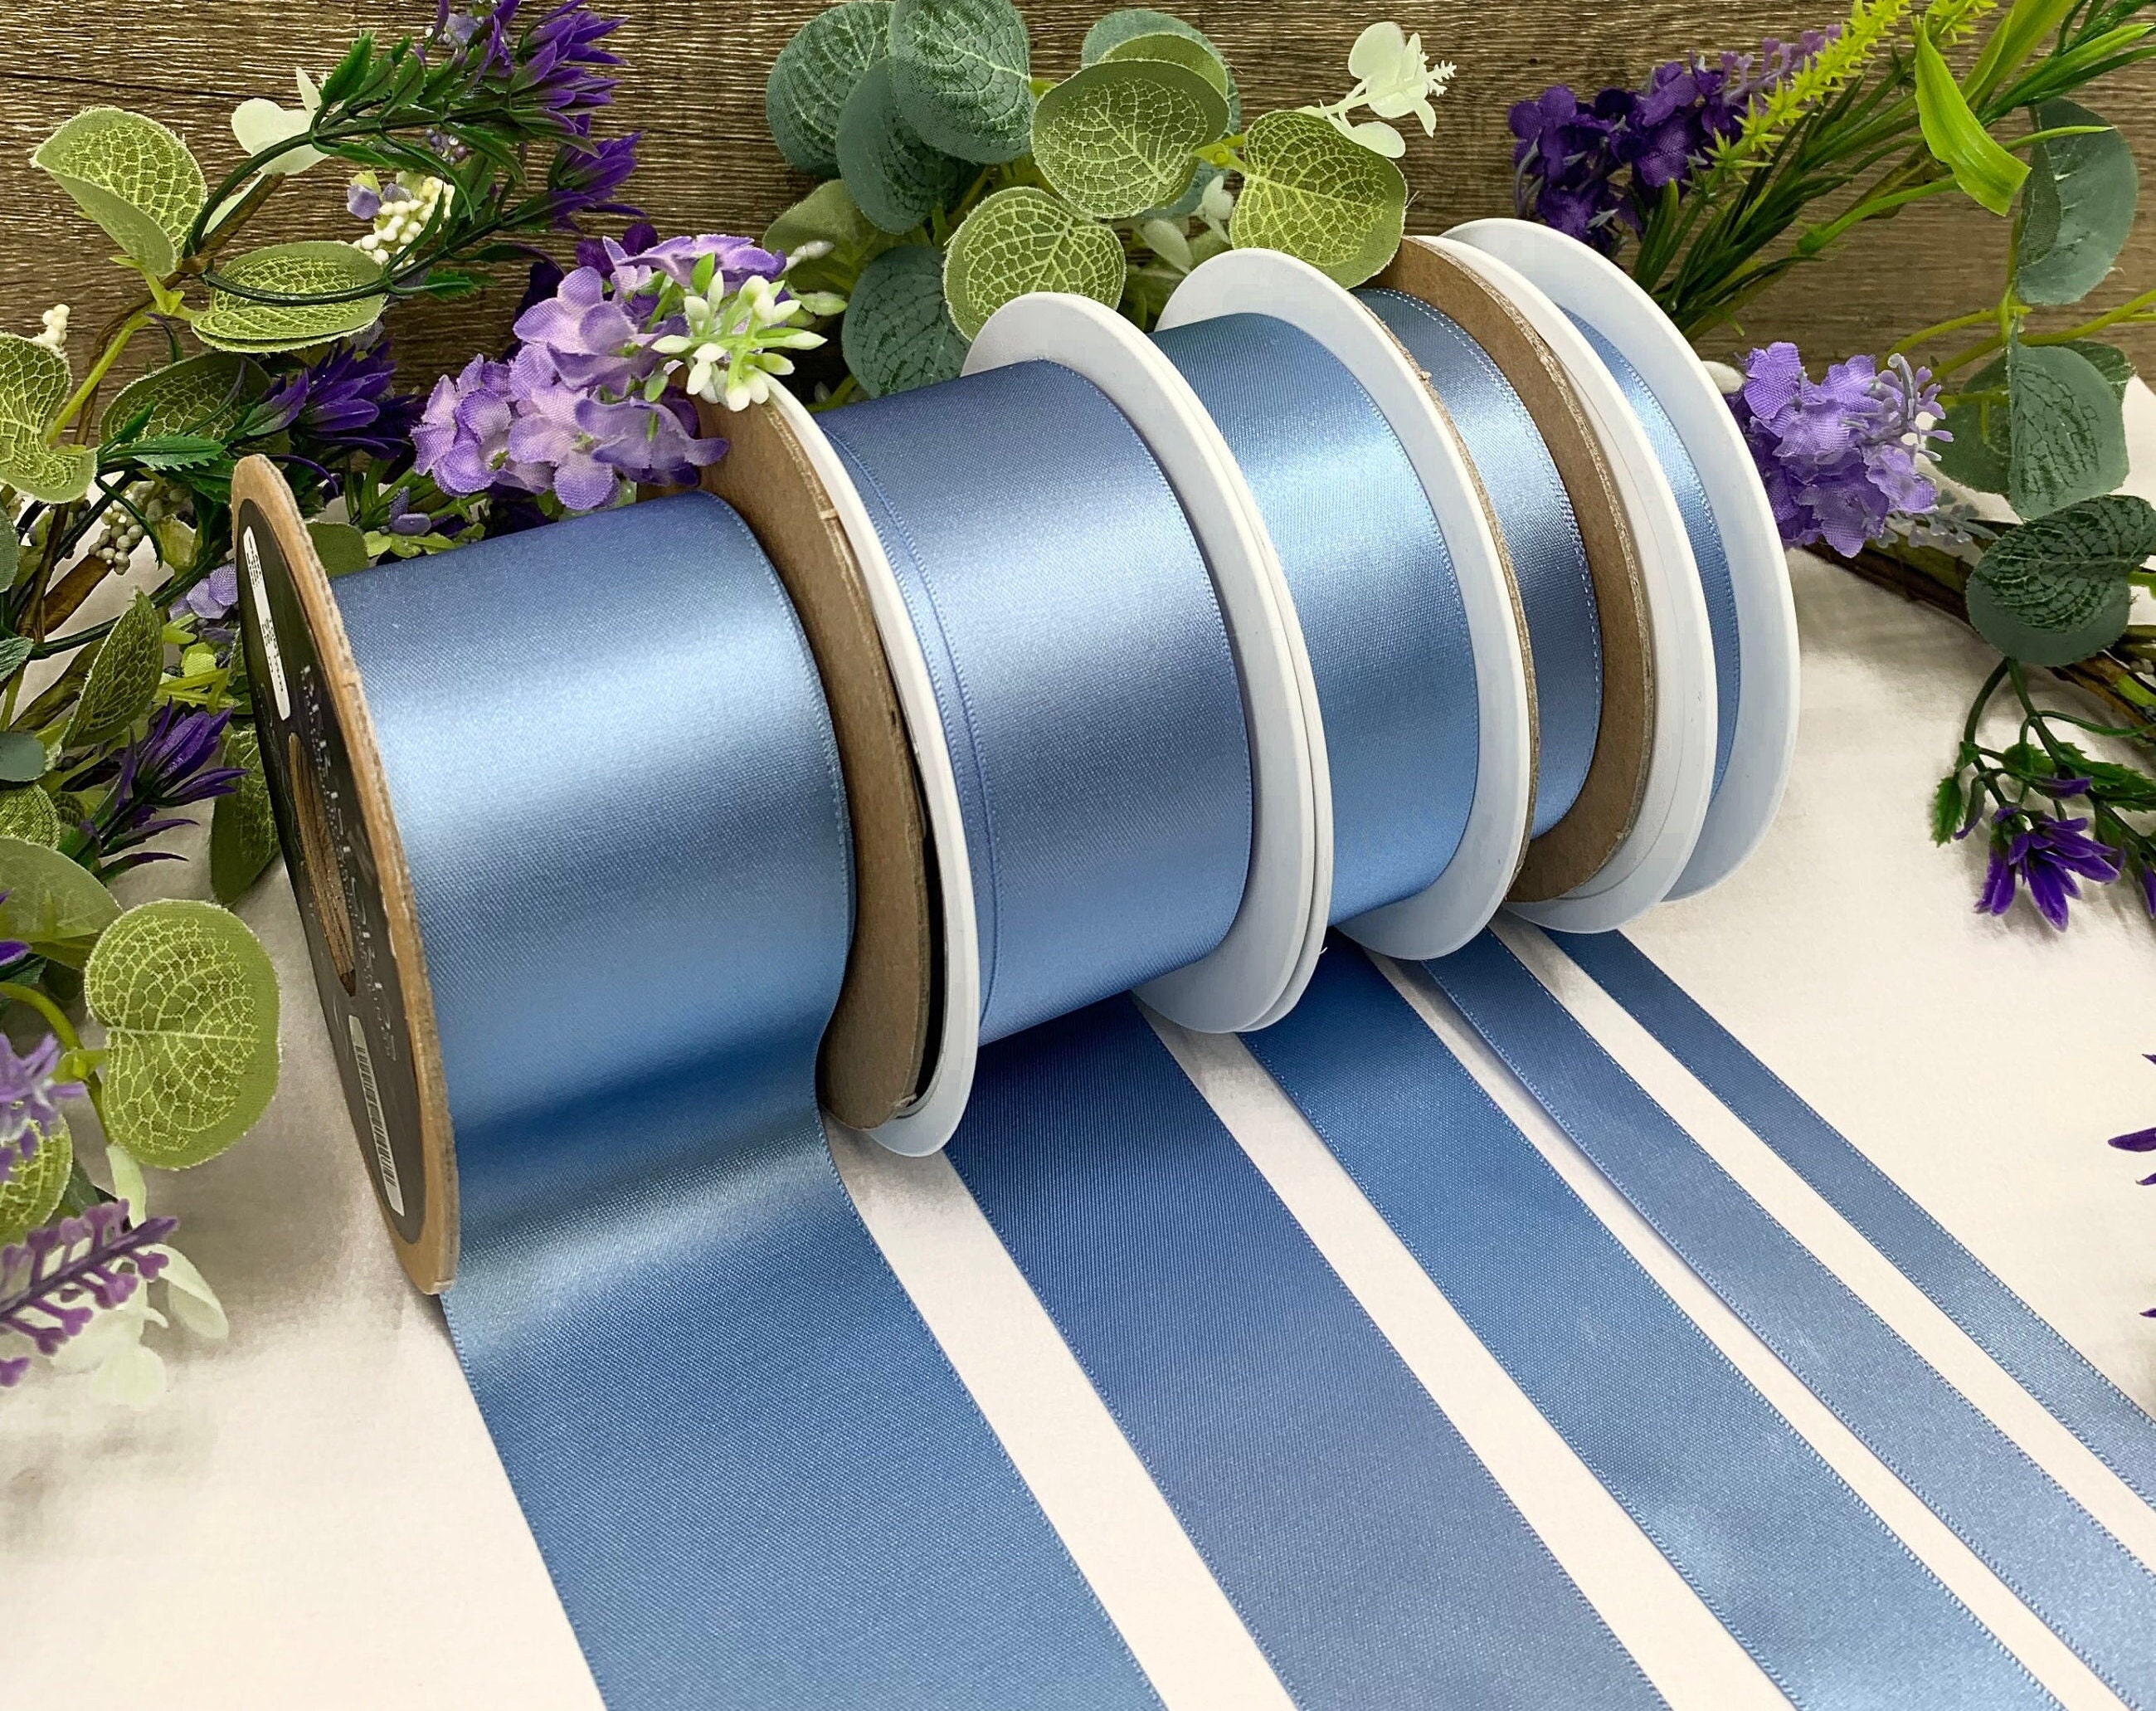 VATIN 1-1/2 inch Double Faced Polyester Dark Dusty Blue Satin Ribbon  -Continuous 25 Yard Spool, Perfect for Wedding Decor, Wreath, Baby  Shower,Gift